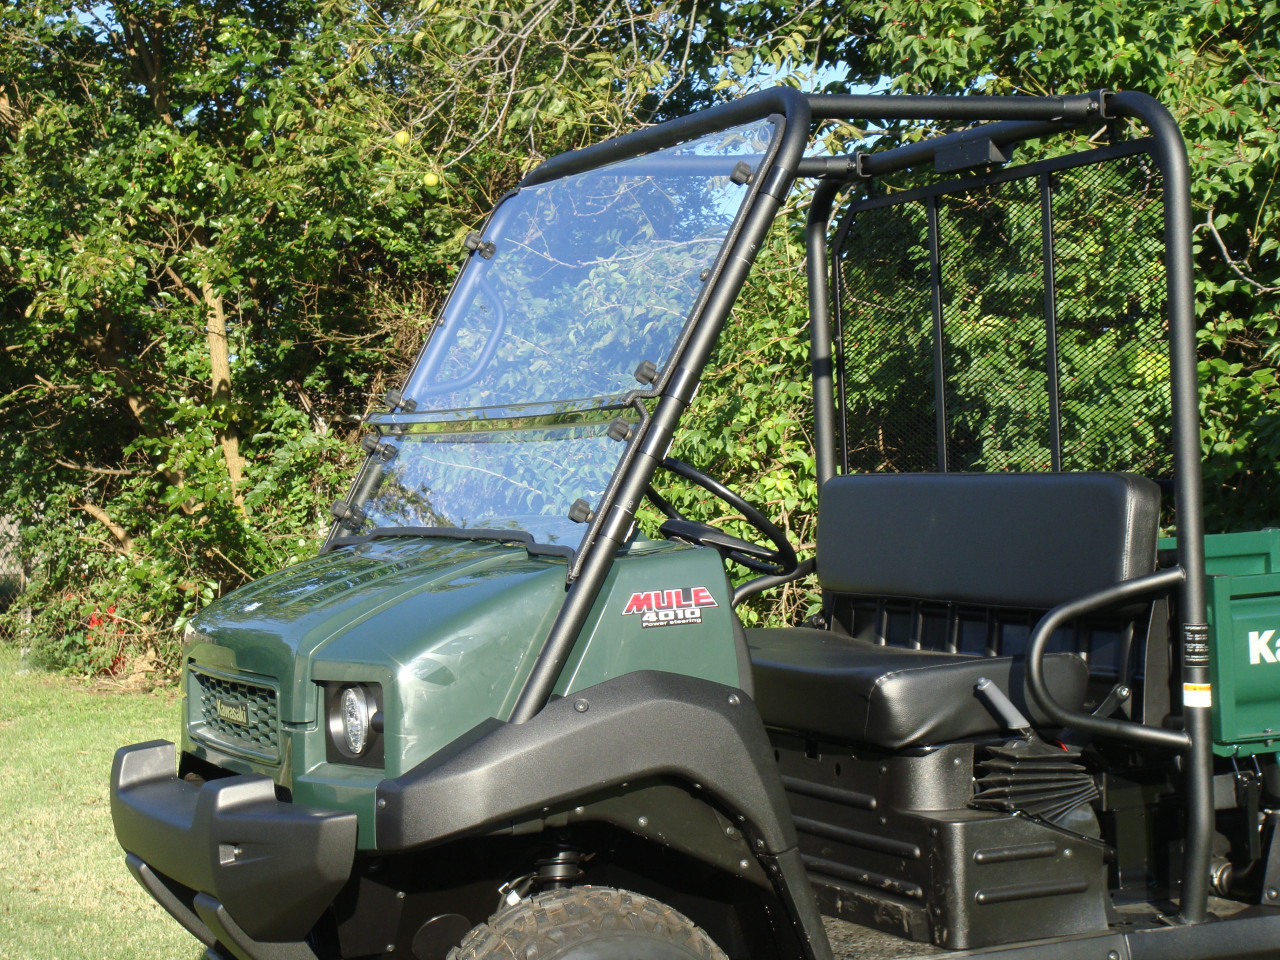 3 Star side x side Kawasaki Mule 3000/3010 windshield front and side angle view